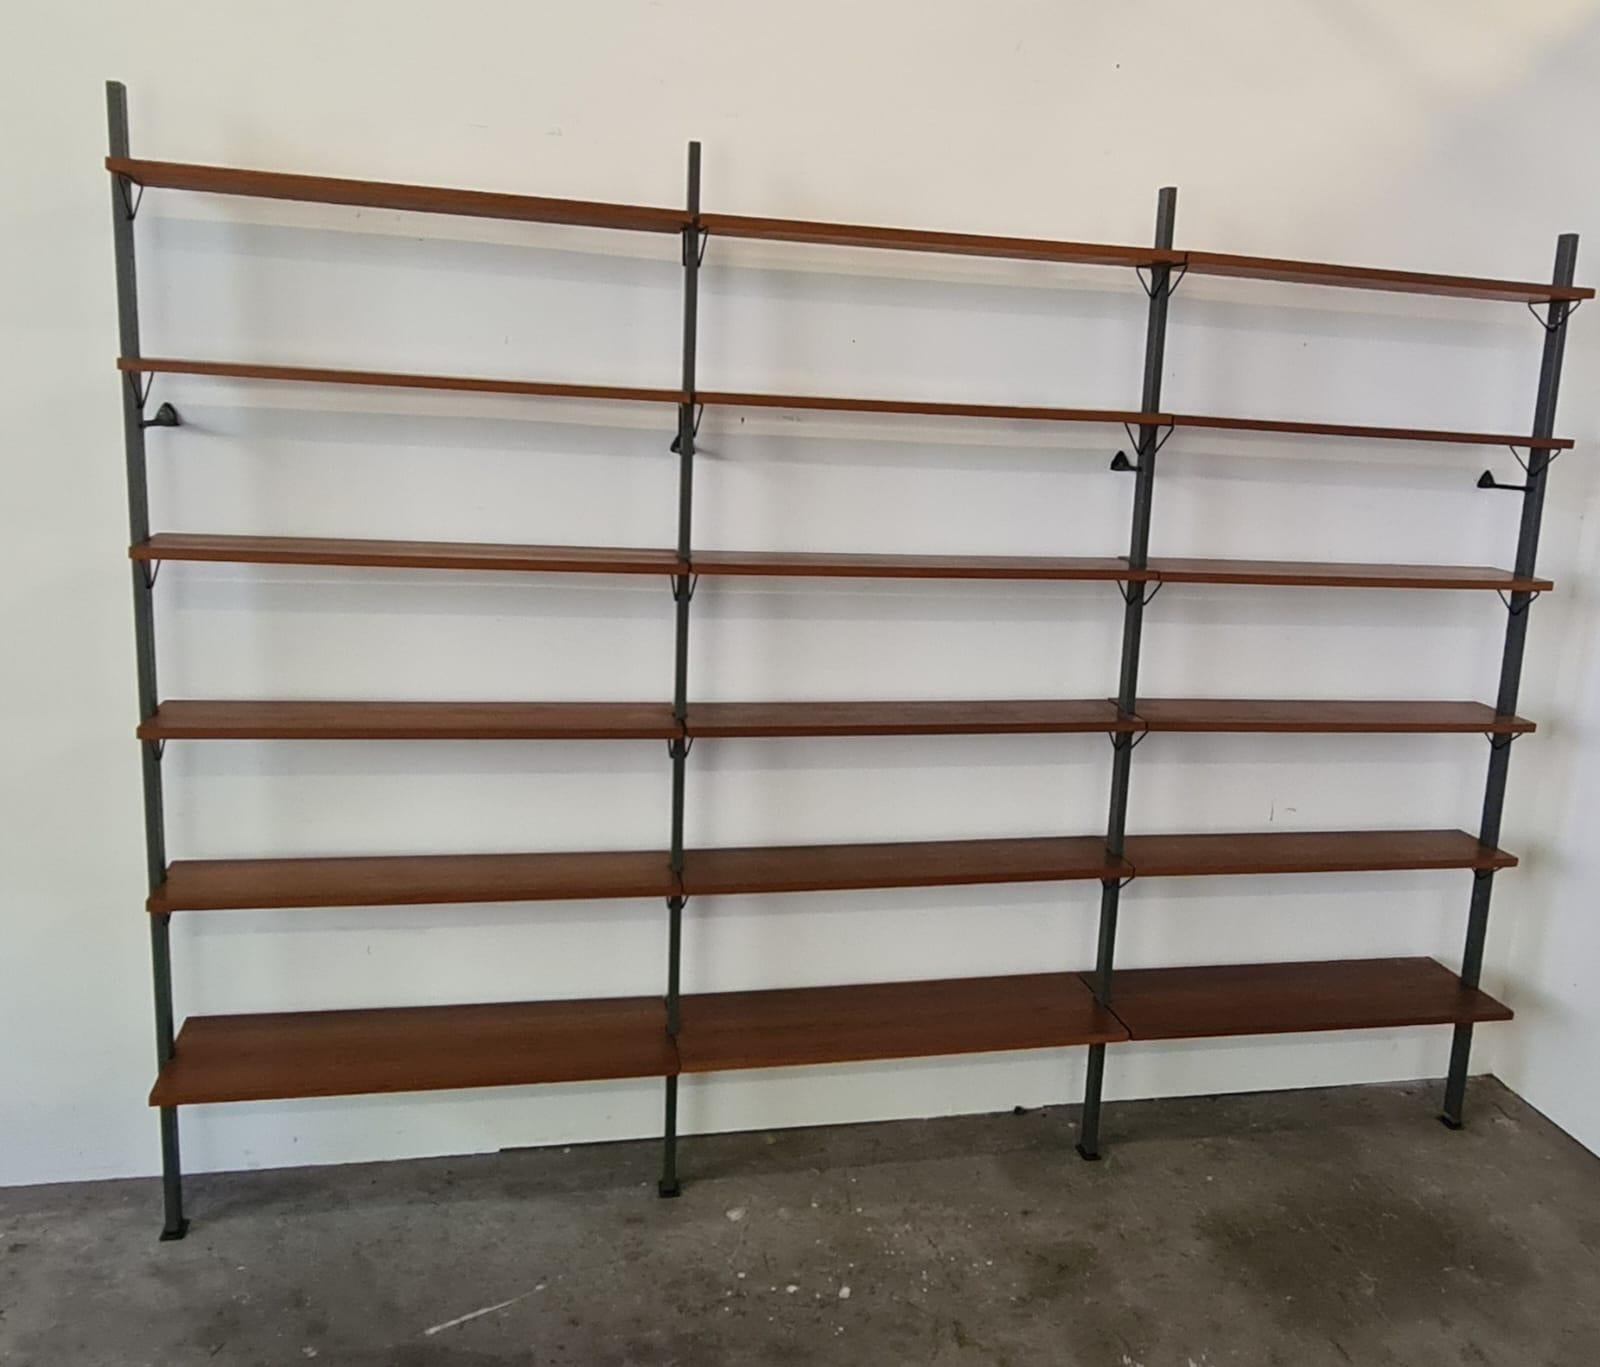 Mid century bookshelf or wall unit designed by Olof Pira for String AB.

Elegant mid century and modular design.

The teak shelves are completely modular.

Can be easily disassembled for shipping.

Good condition with normal age related